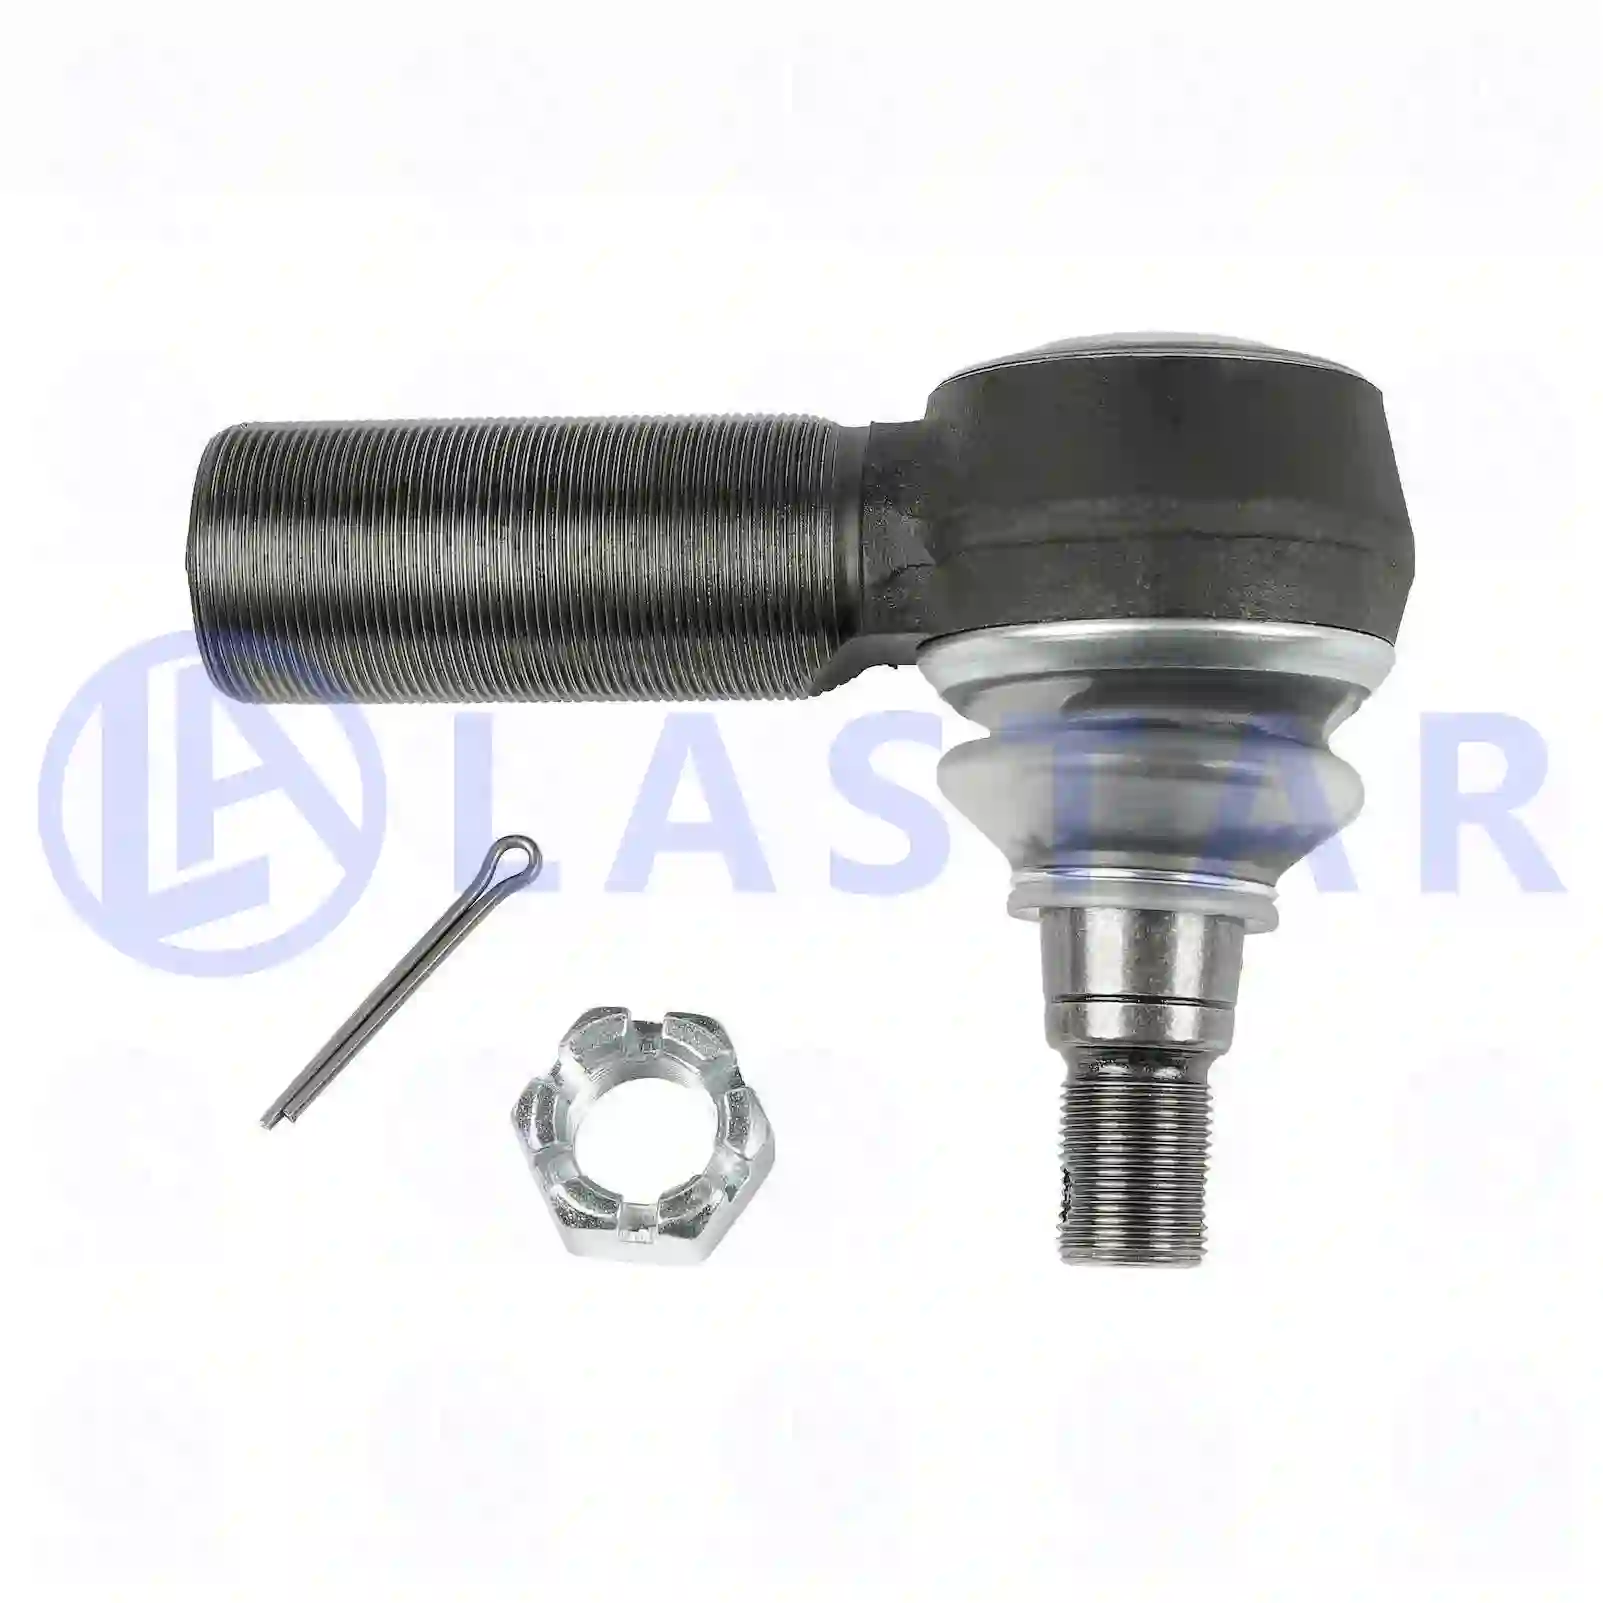 Drag Link Ball joint, right hand thread, la no: 77705174 ,  oem no:21448350, 3097999, 3986736, 85103625, 85104188, 85119942, ZG40380-0008 Lastar Spare Part | Truck Spare Parts, Auotomotive Spare Parts